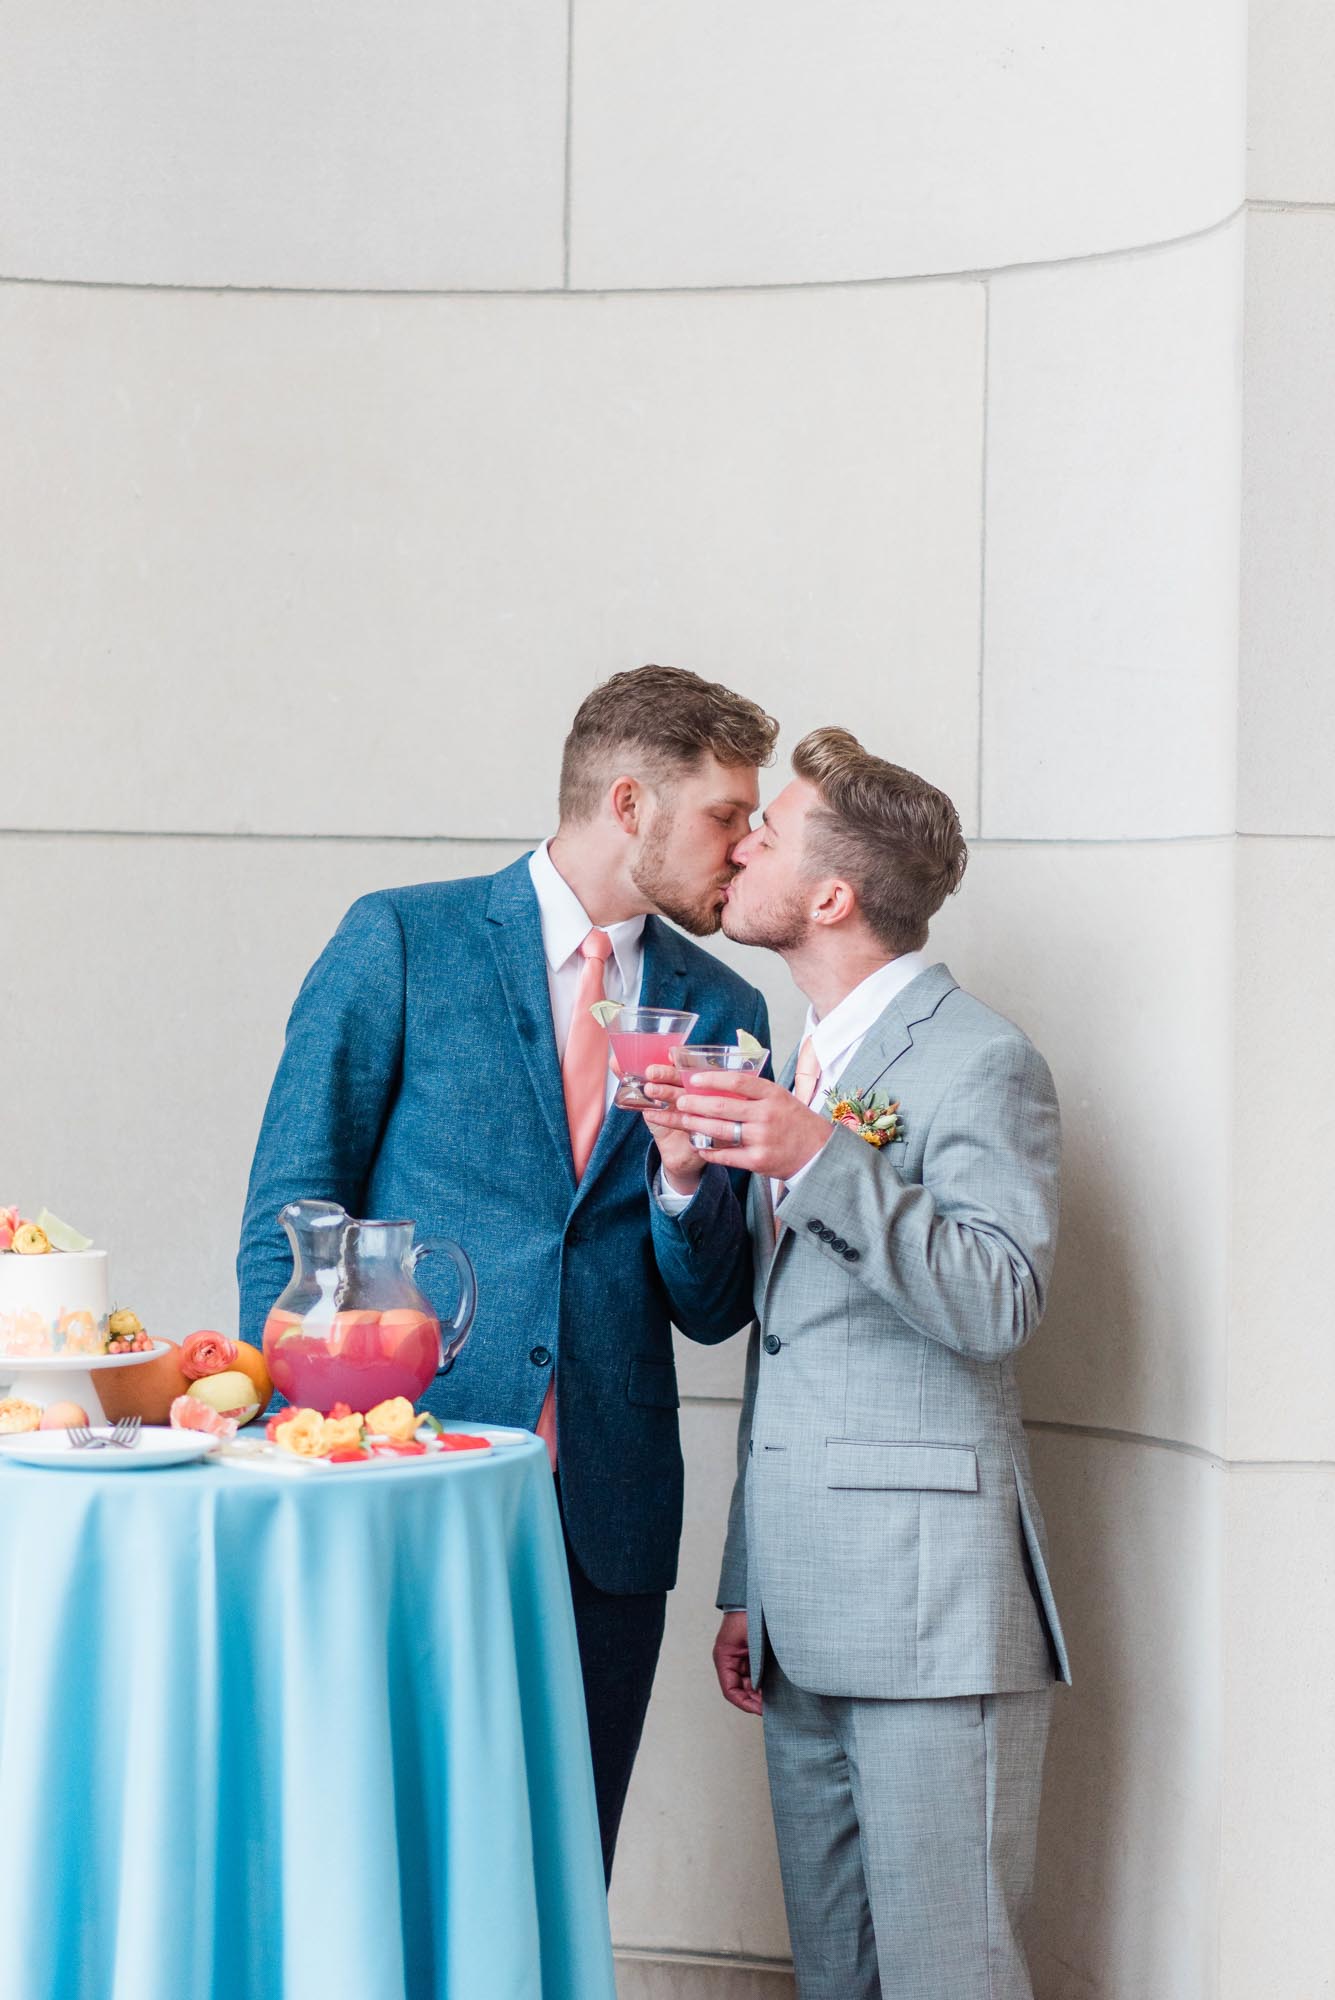 Elopement inspiration with pastel color palette | Samantha Zenewicz Photography | Featured on Equally Wed, the leading LGBTQ+ wedding magazine